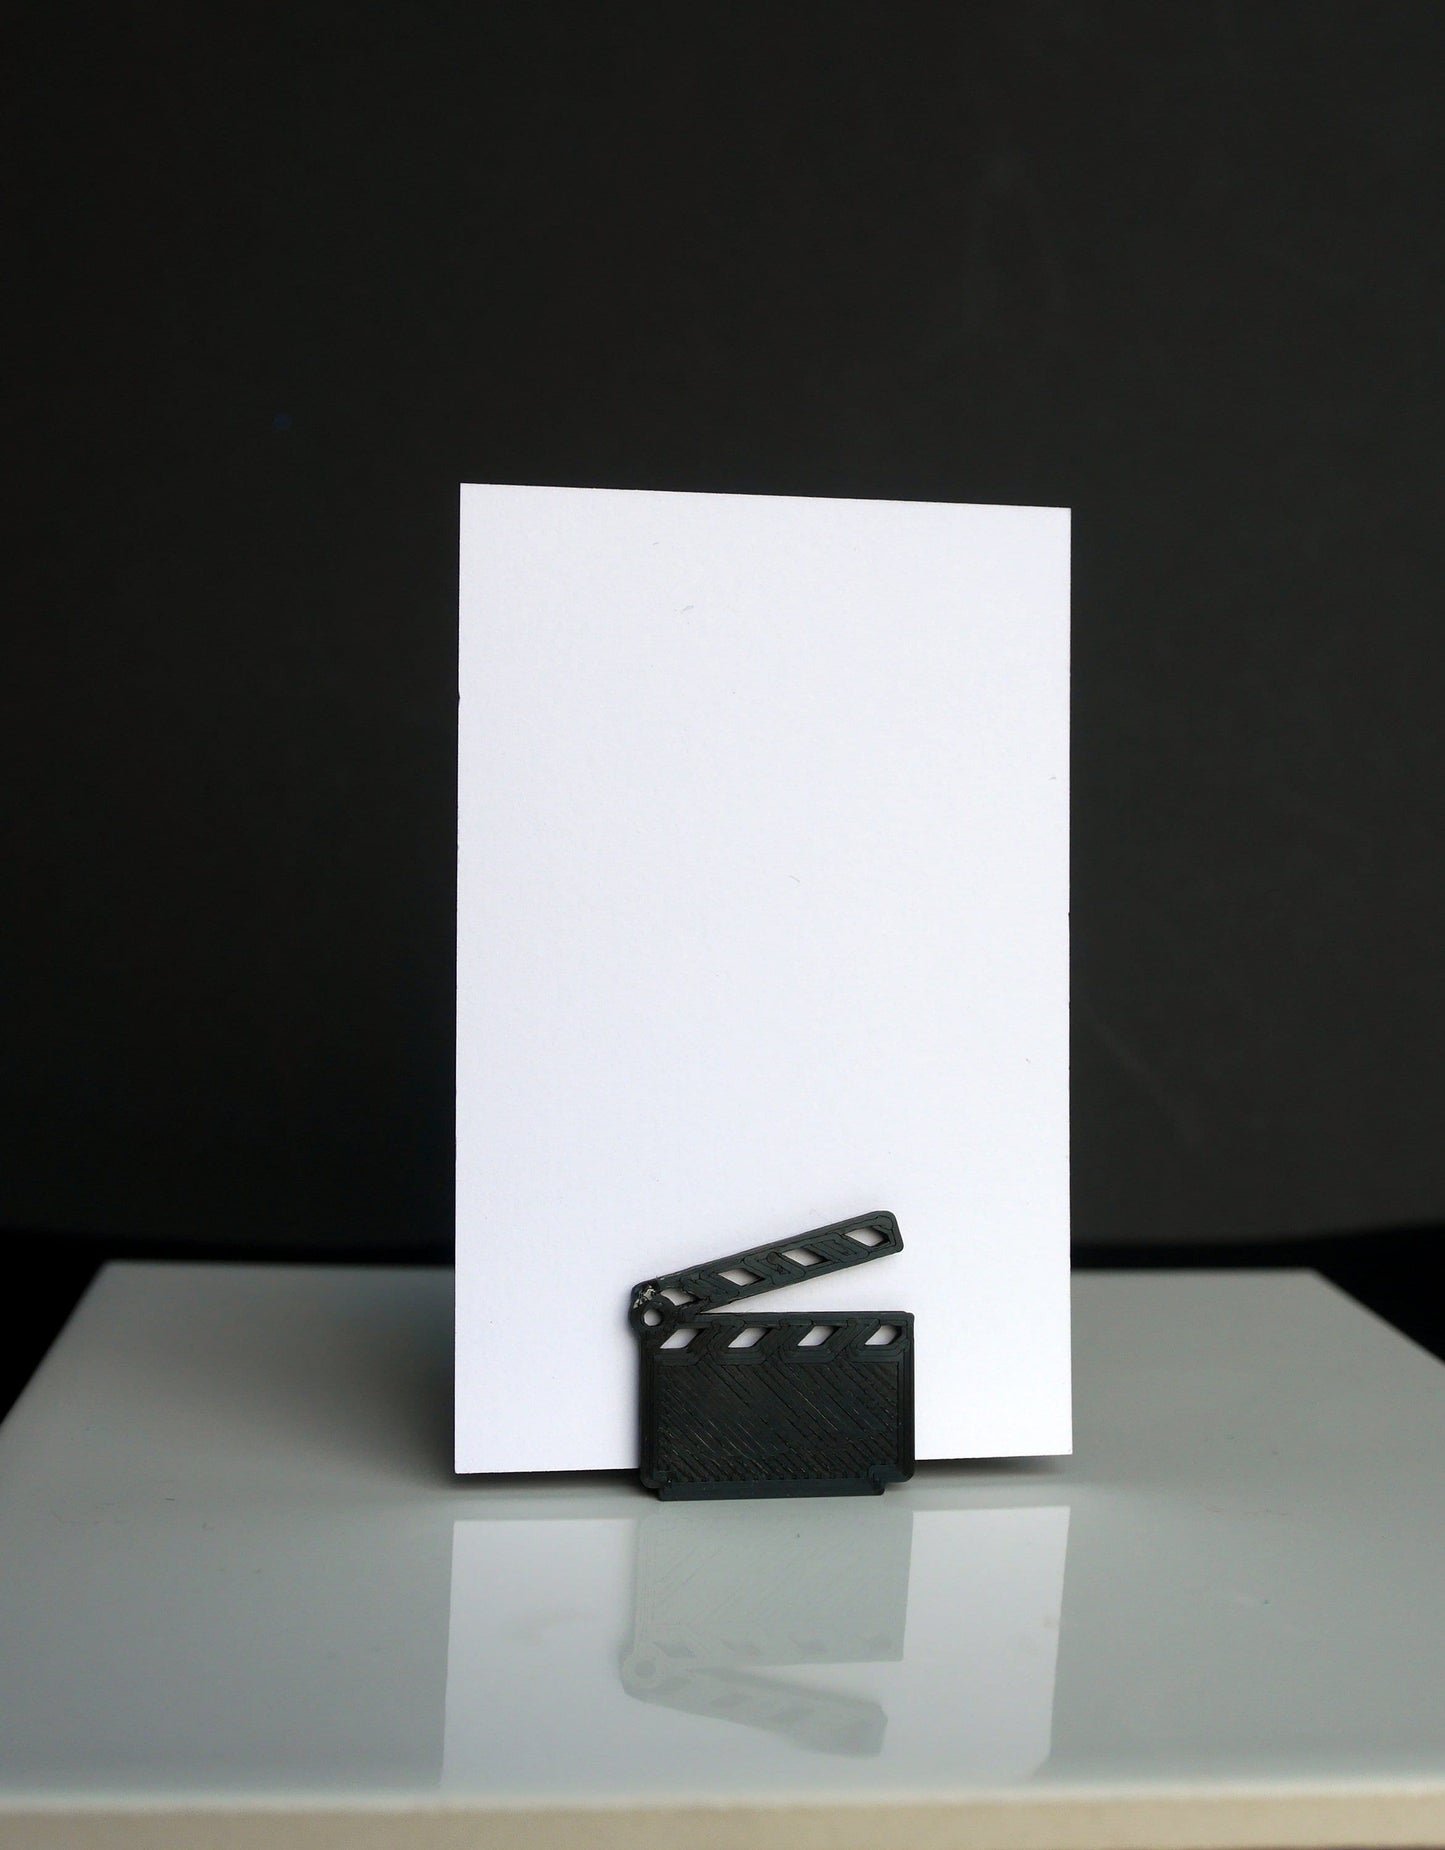 Hollywood Theme Director's Clapperboard Shape Place Card Holders